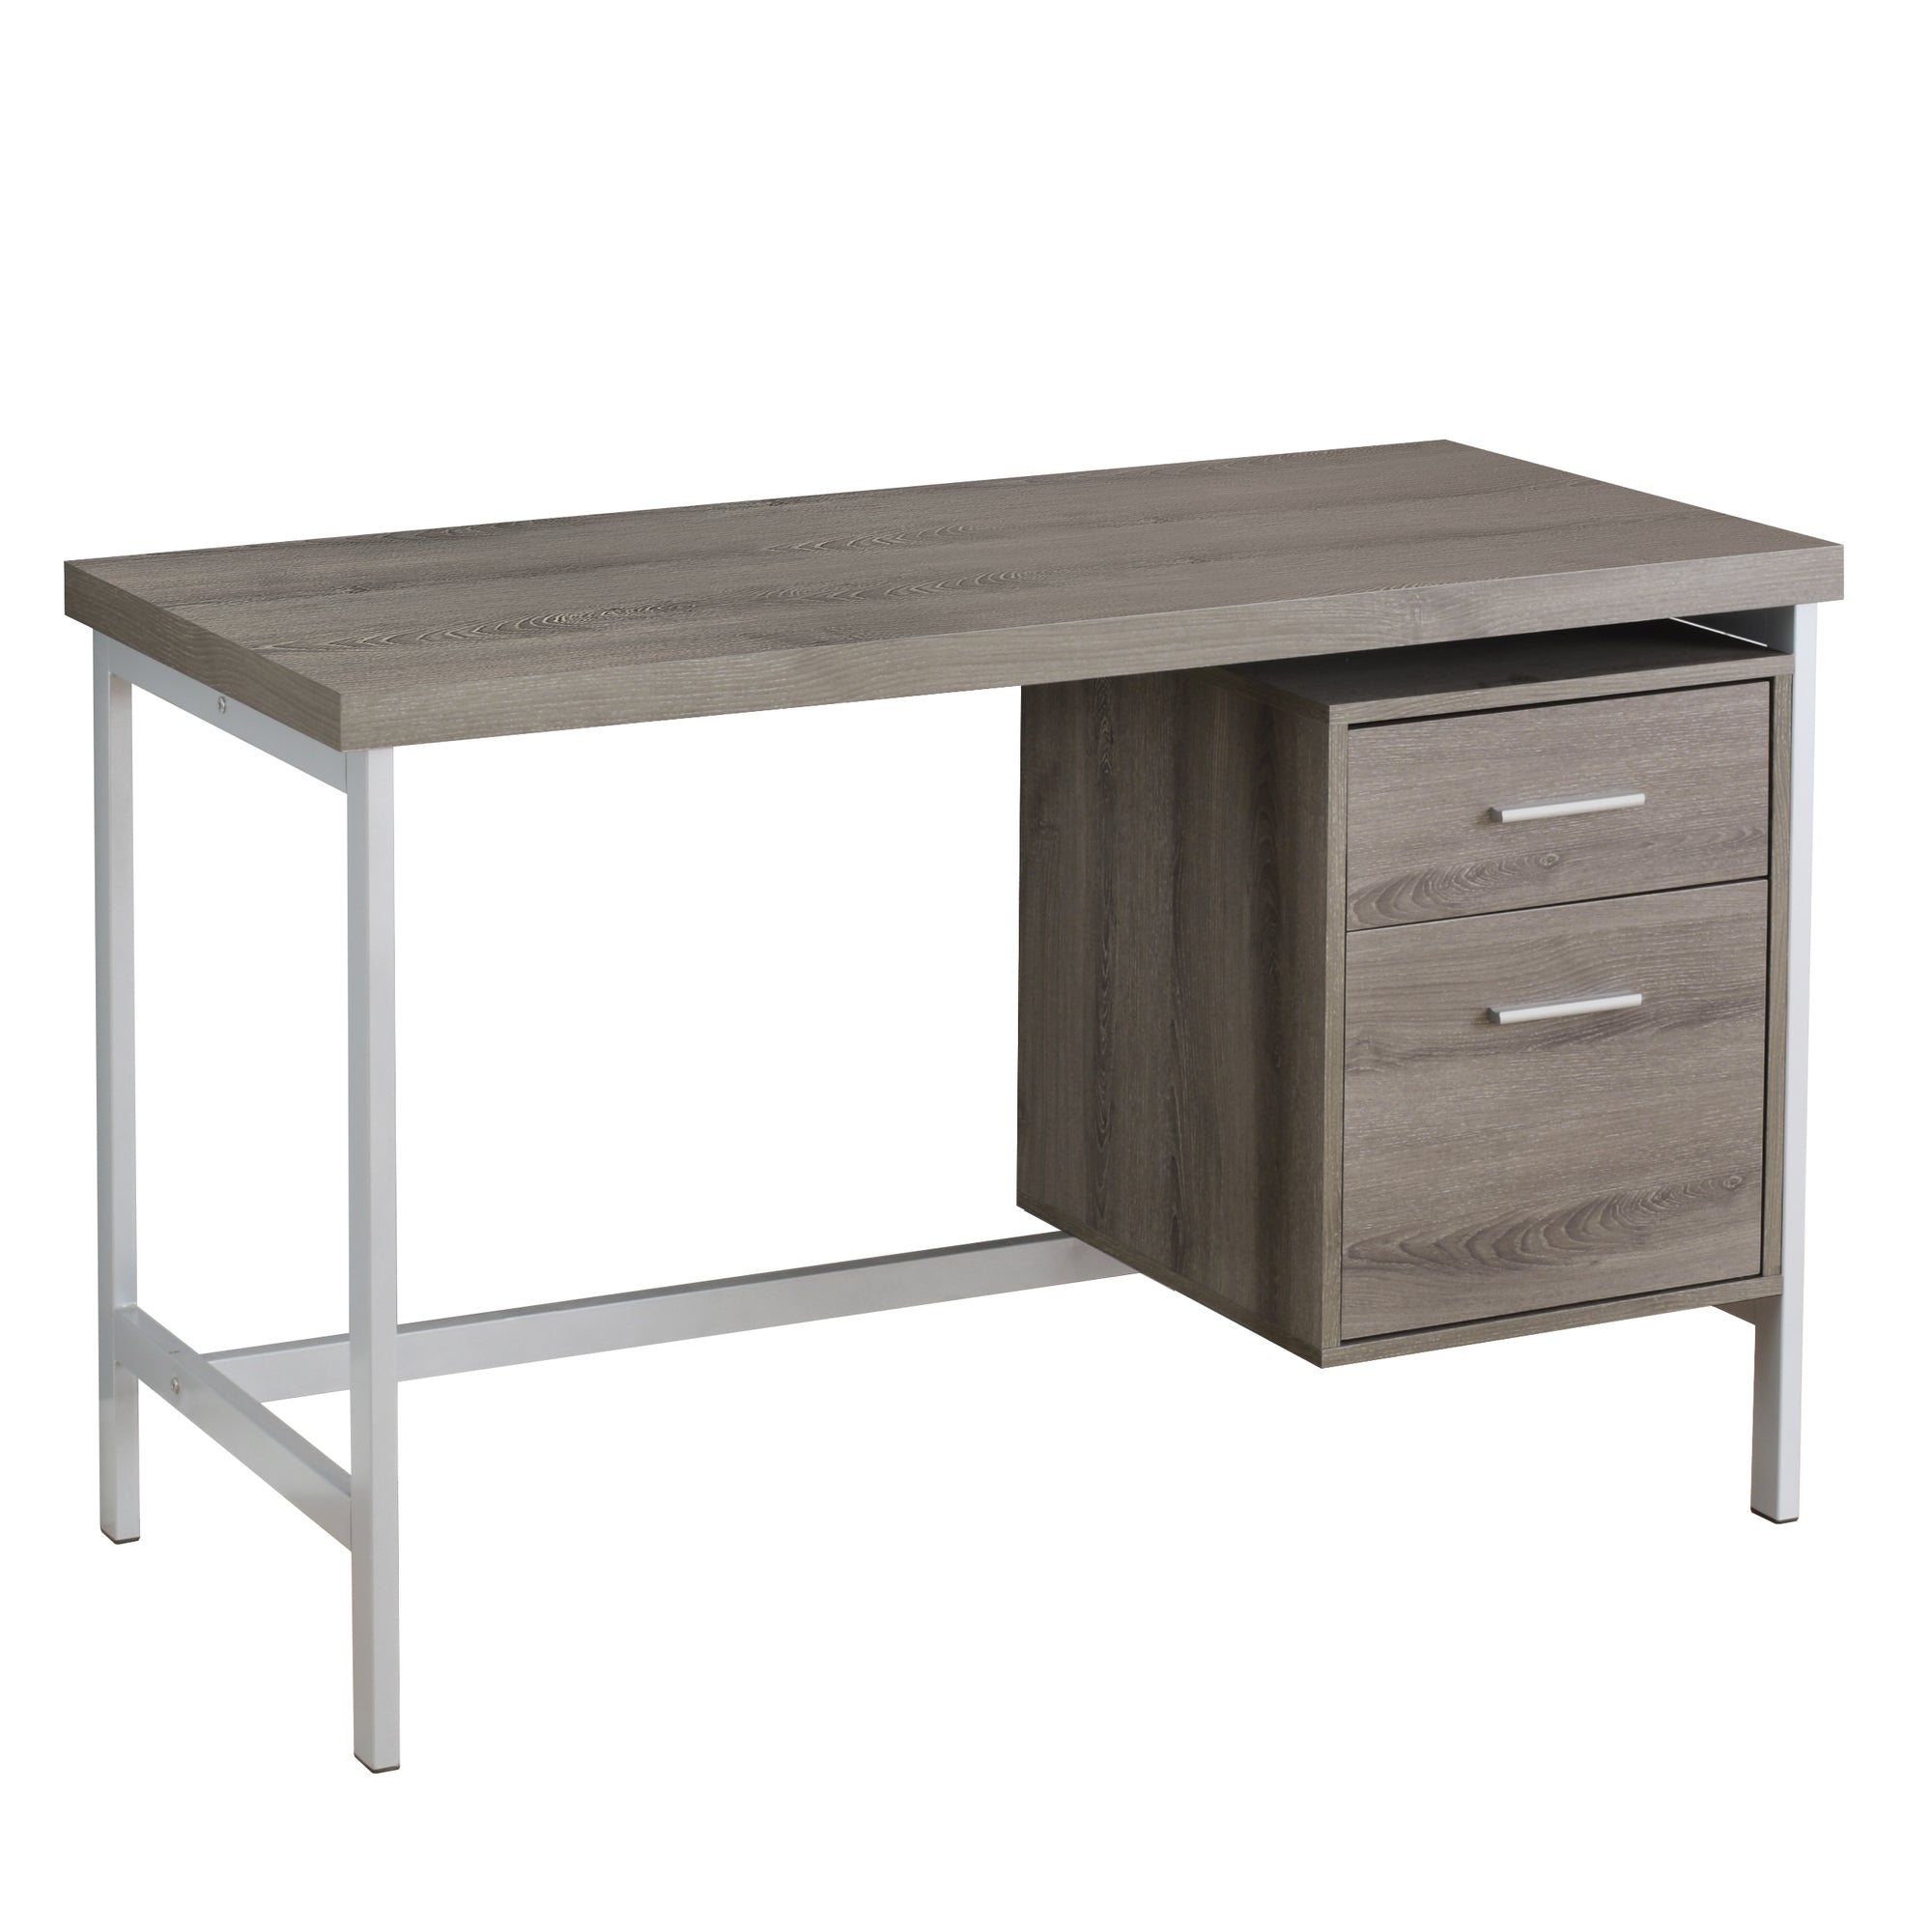 MN-237150    Computer Desk, Home Office, Laptop, Left, Right Set-Up, Storage Drawers, 48"L, Metal, Laminate, Dark Taupe, Silver, Contemporary, Modern